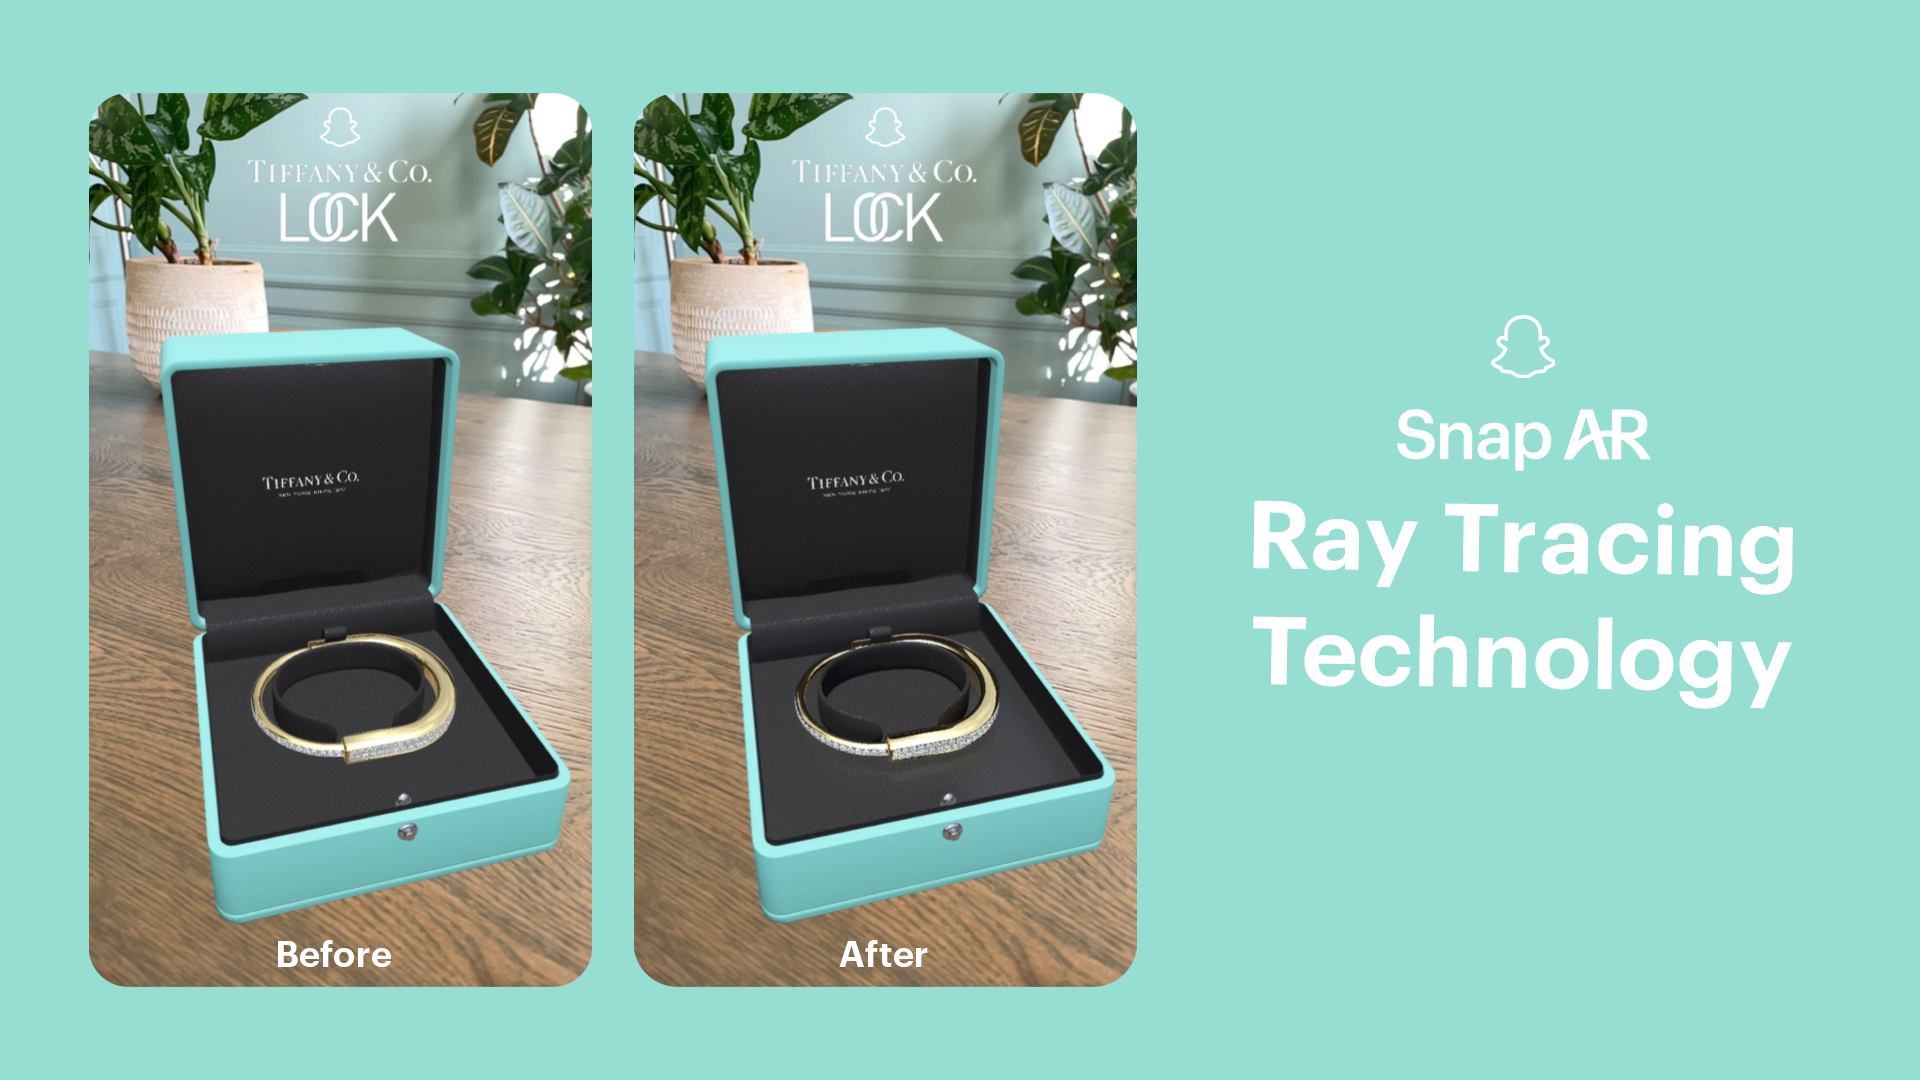 Snap launches ray tracing technology